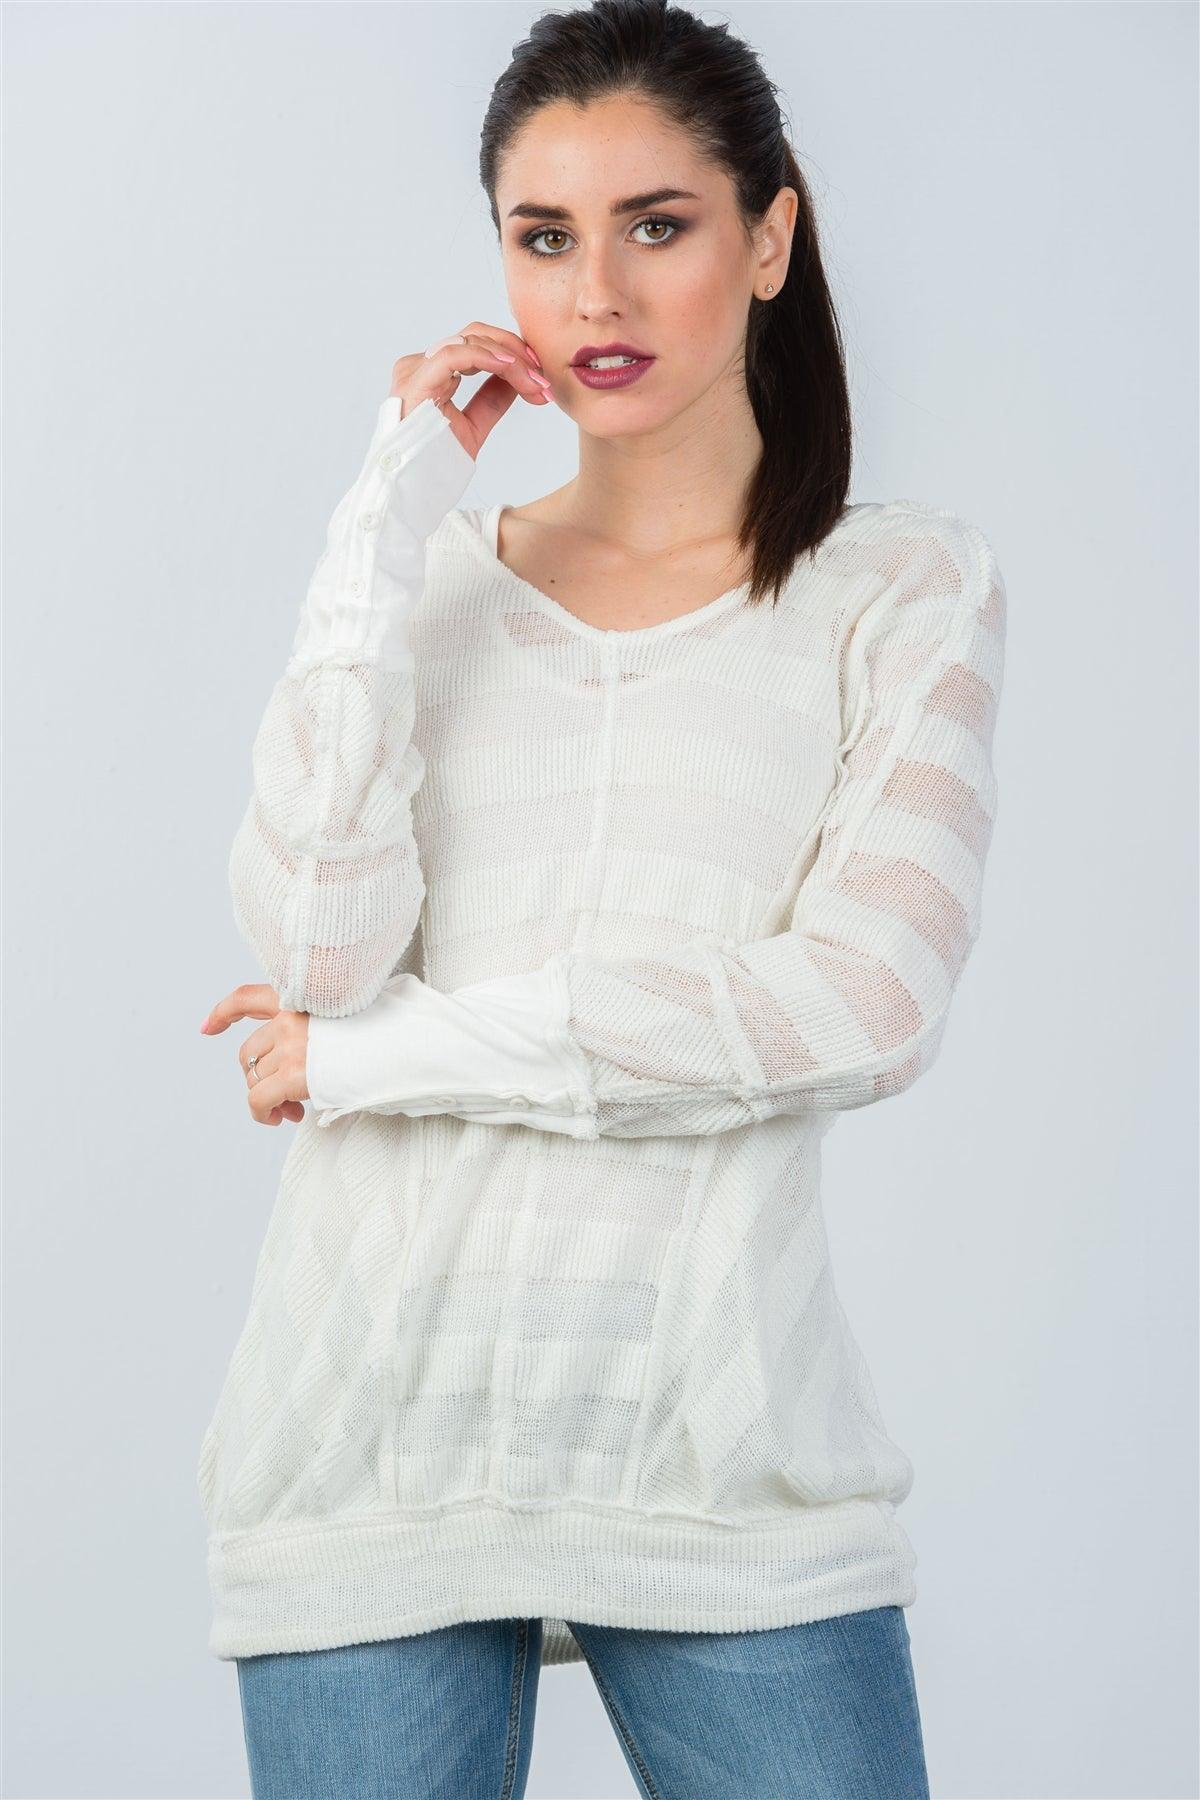 White Mesh Knit Sweater And Tank Duo /3-2-2